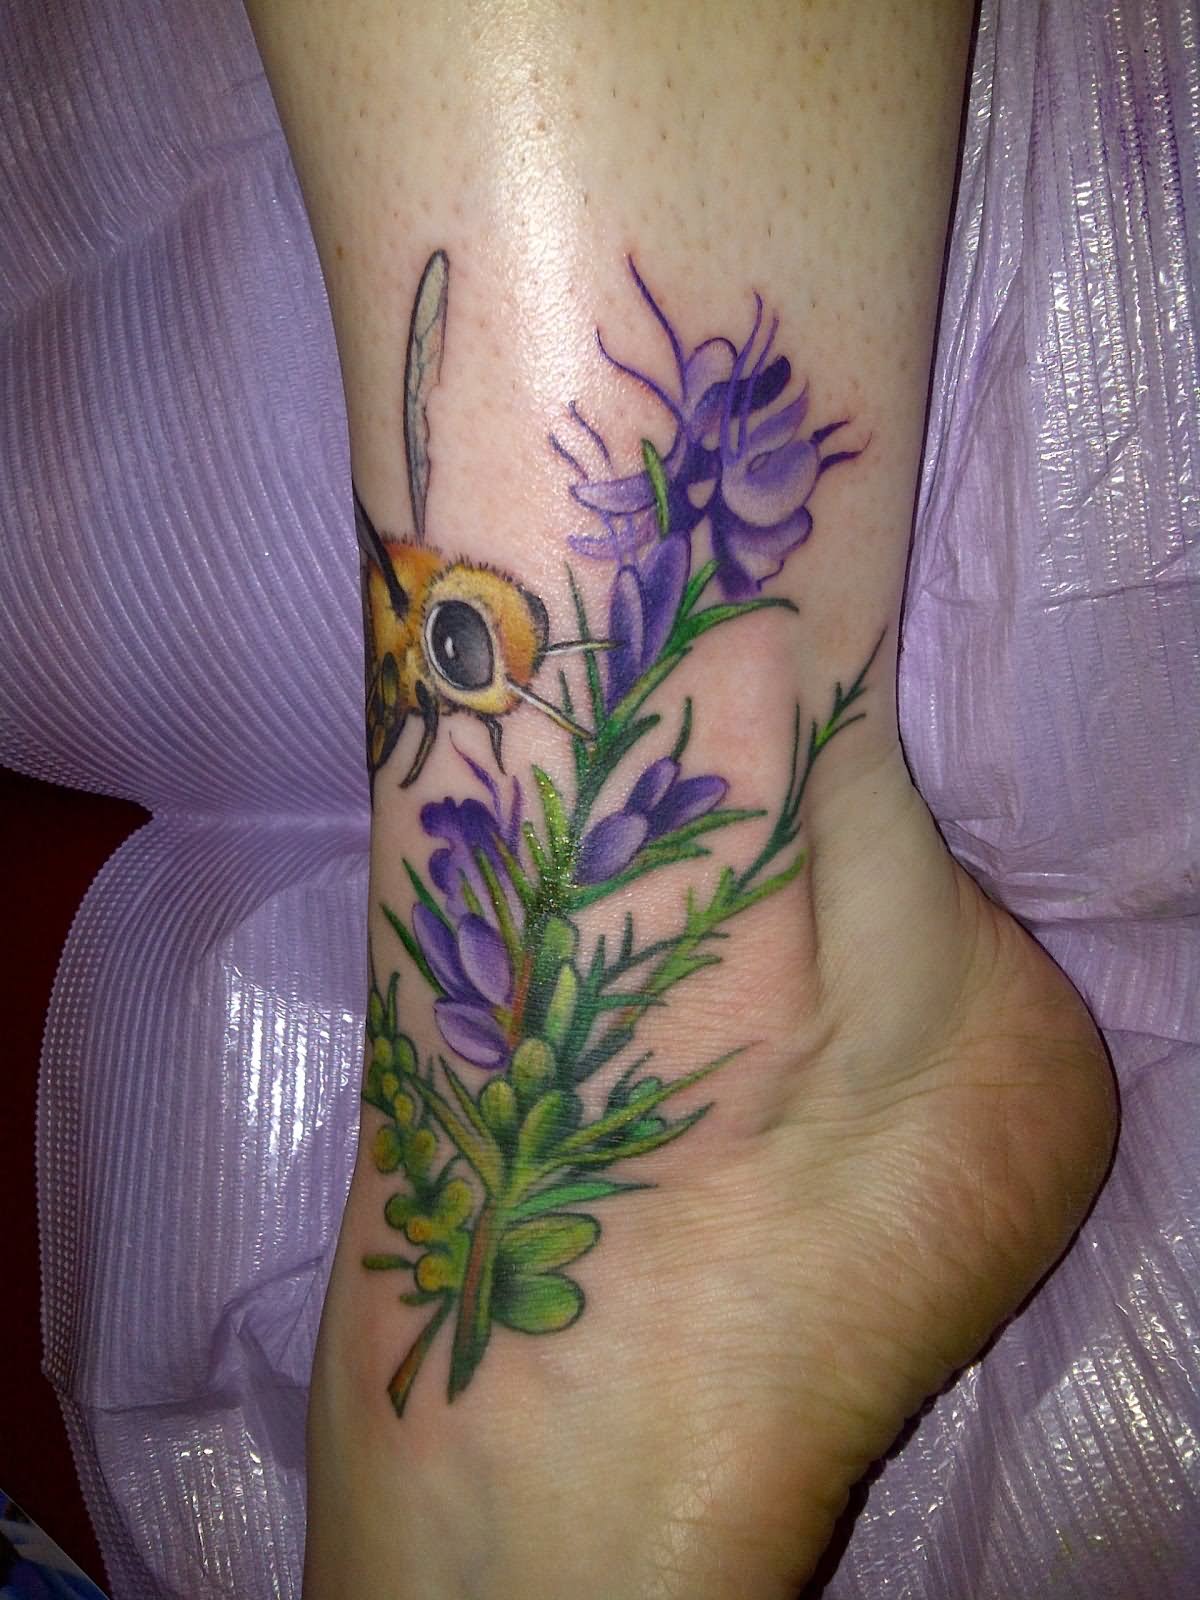 Cute Bee And Flowers Tattoo Design For Foot